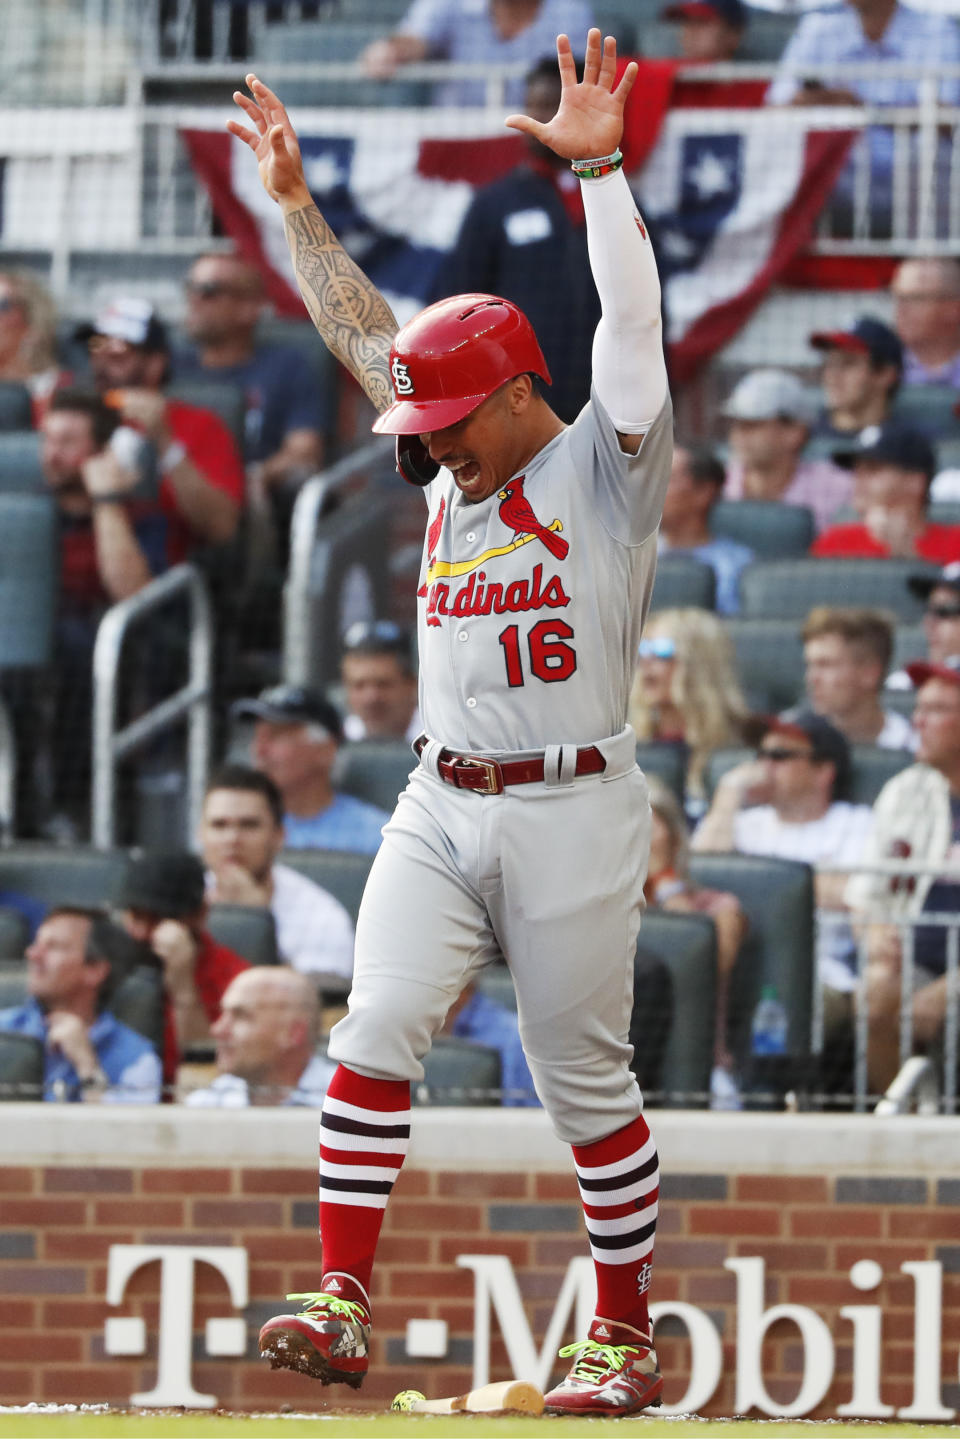 St. Louis Cardinals' Kolten Wong celebrates after scoring on a wild pitch by Atlanta Braves pitcher Max Fried during the first inning of Game 5 of their National League Division Series baseball game Wednesday, Oct. 9, 2019, in Atlanta. (AP Photo/John Bazemore)